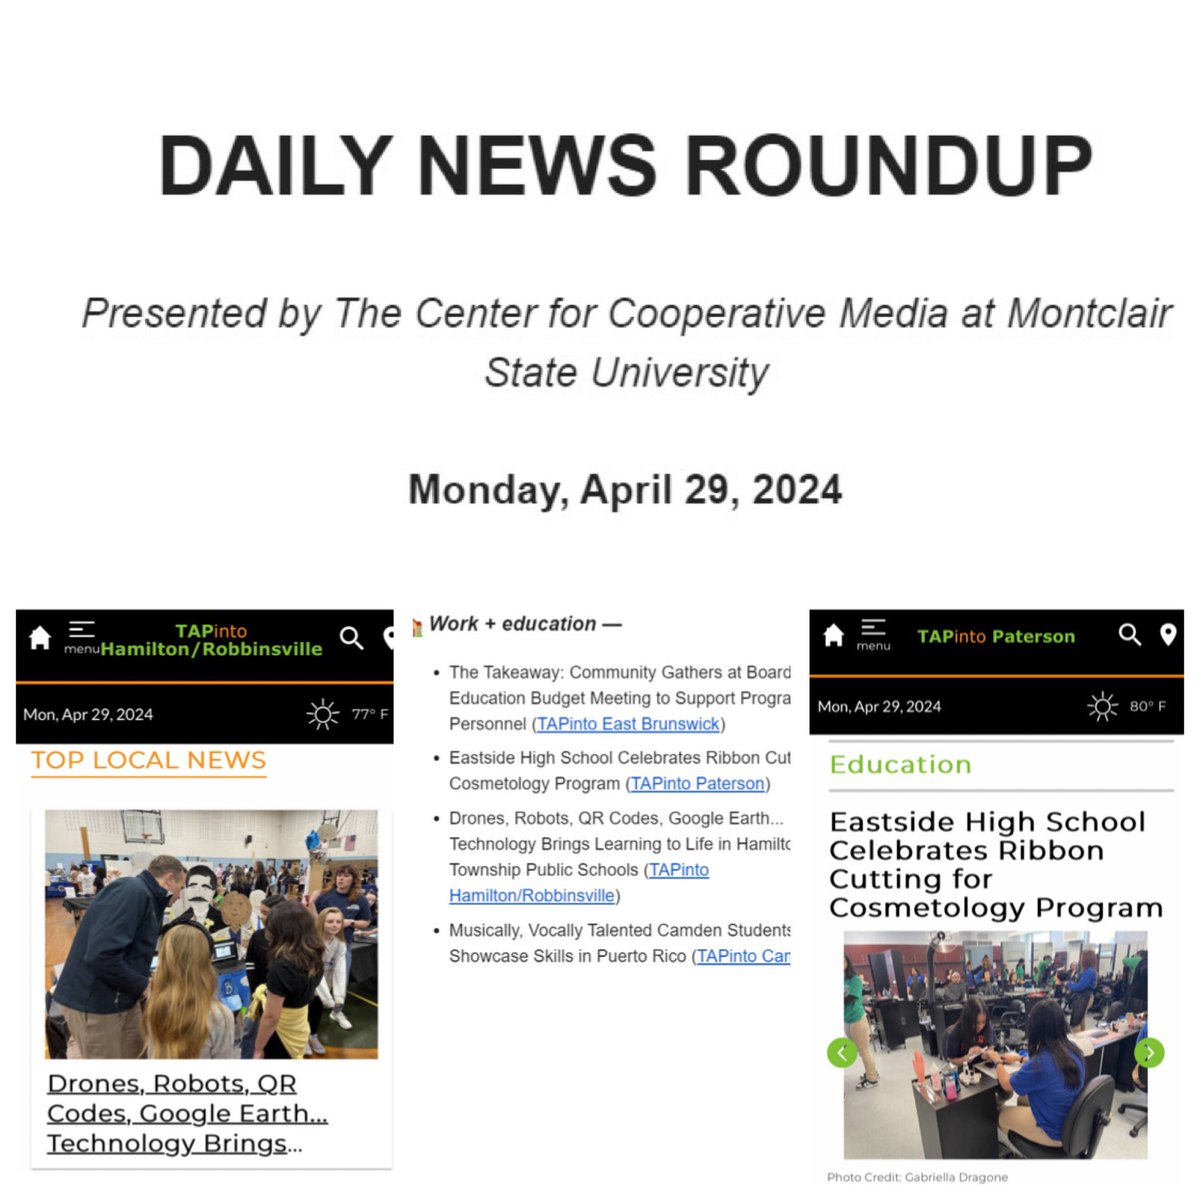 Proud to have two stories included in today’s Daily News Roundup by @CenterCoopMedia- and to be sitting alongside two others from the growing @TAPintoLocal network! No outlet is covering #localnews, especially #education, in #NewJersey’s communities like @TAPintoLocal!